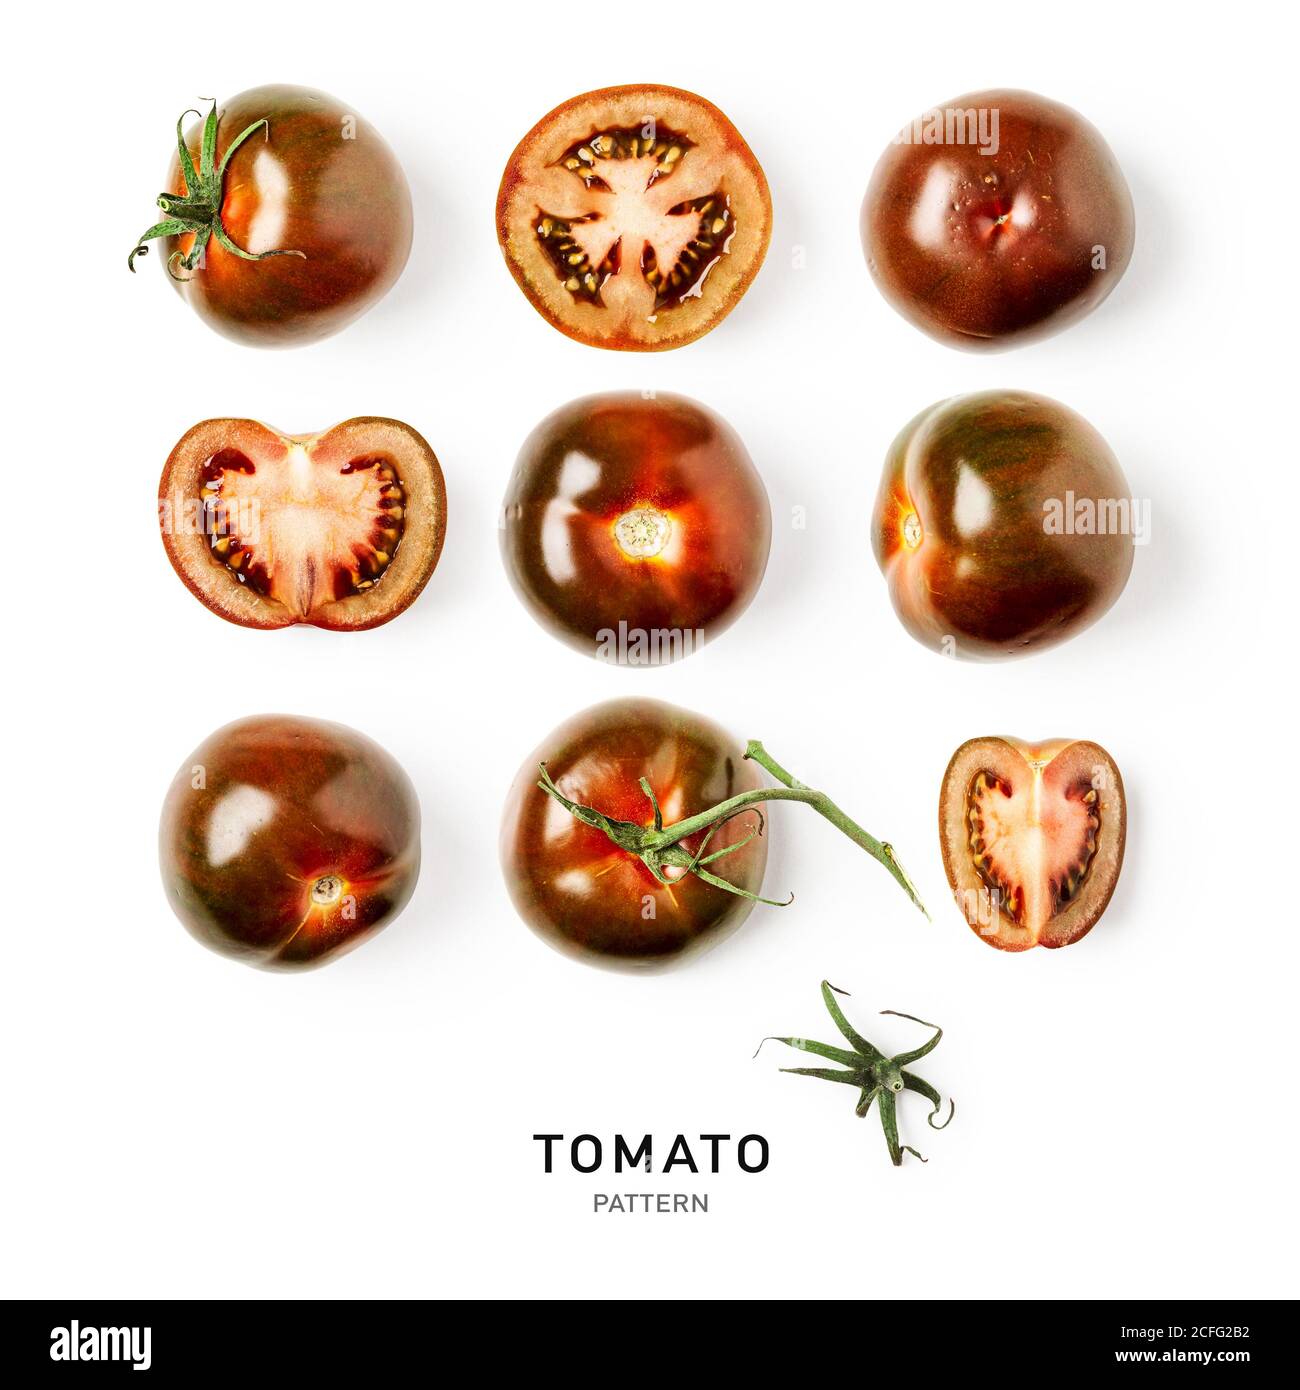 Fresh tomato creative pattern and collection isolated on white background. Food, healthy eating and dieting concept. Sommer brown kumato tomatoes arra Stock Photo